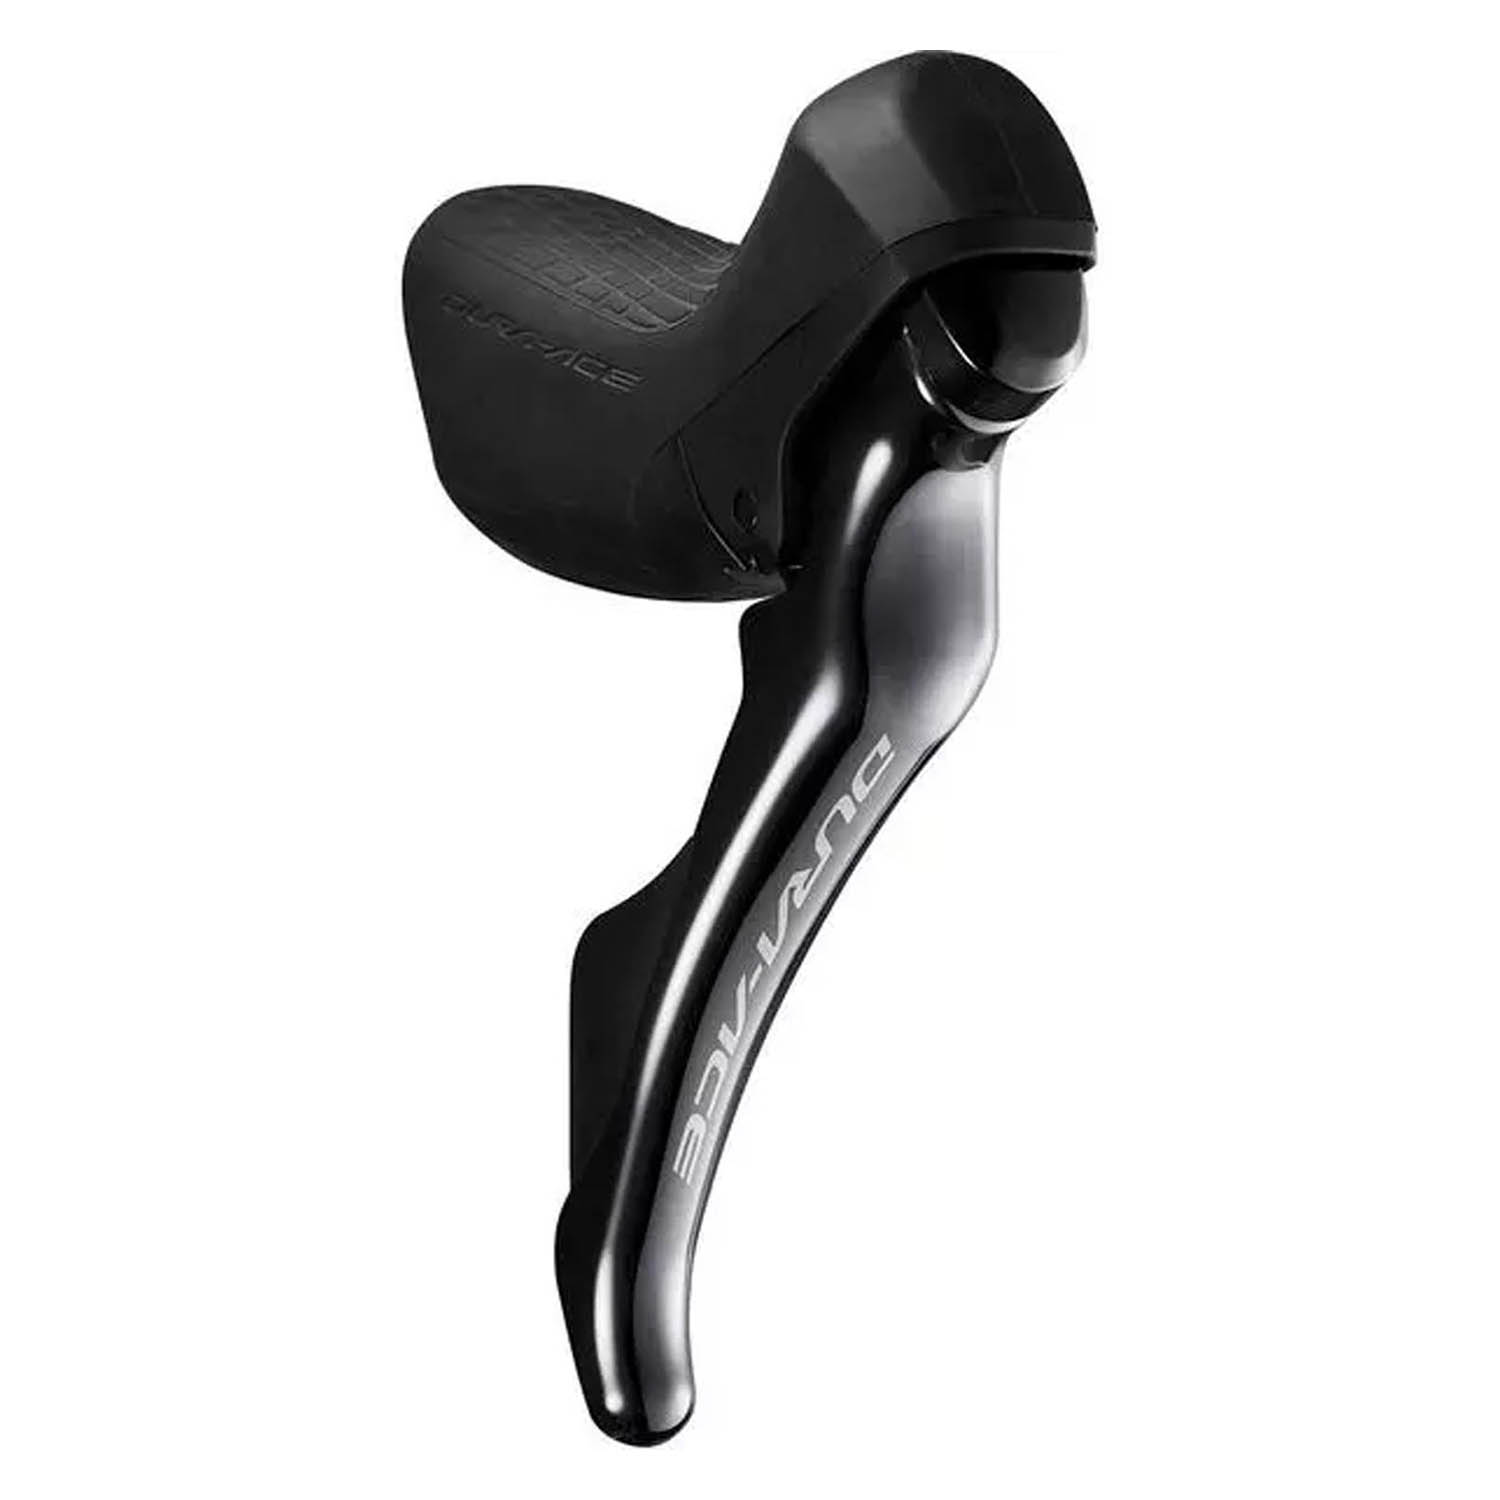 Shimano racefiets shifters Dura-Ace R9120